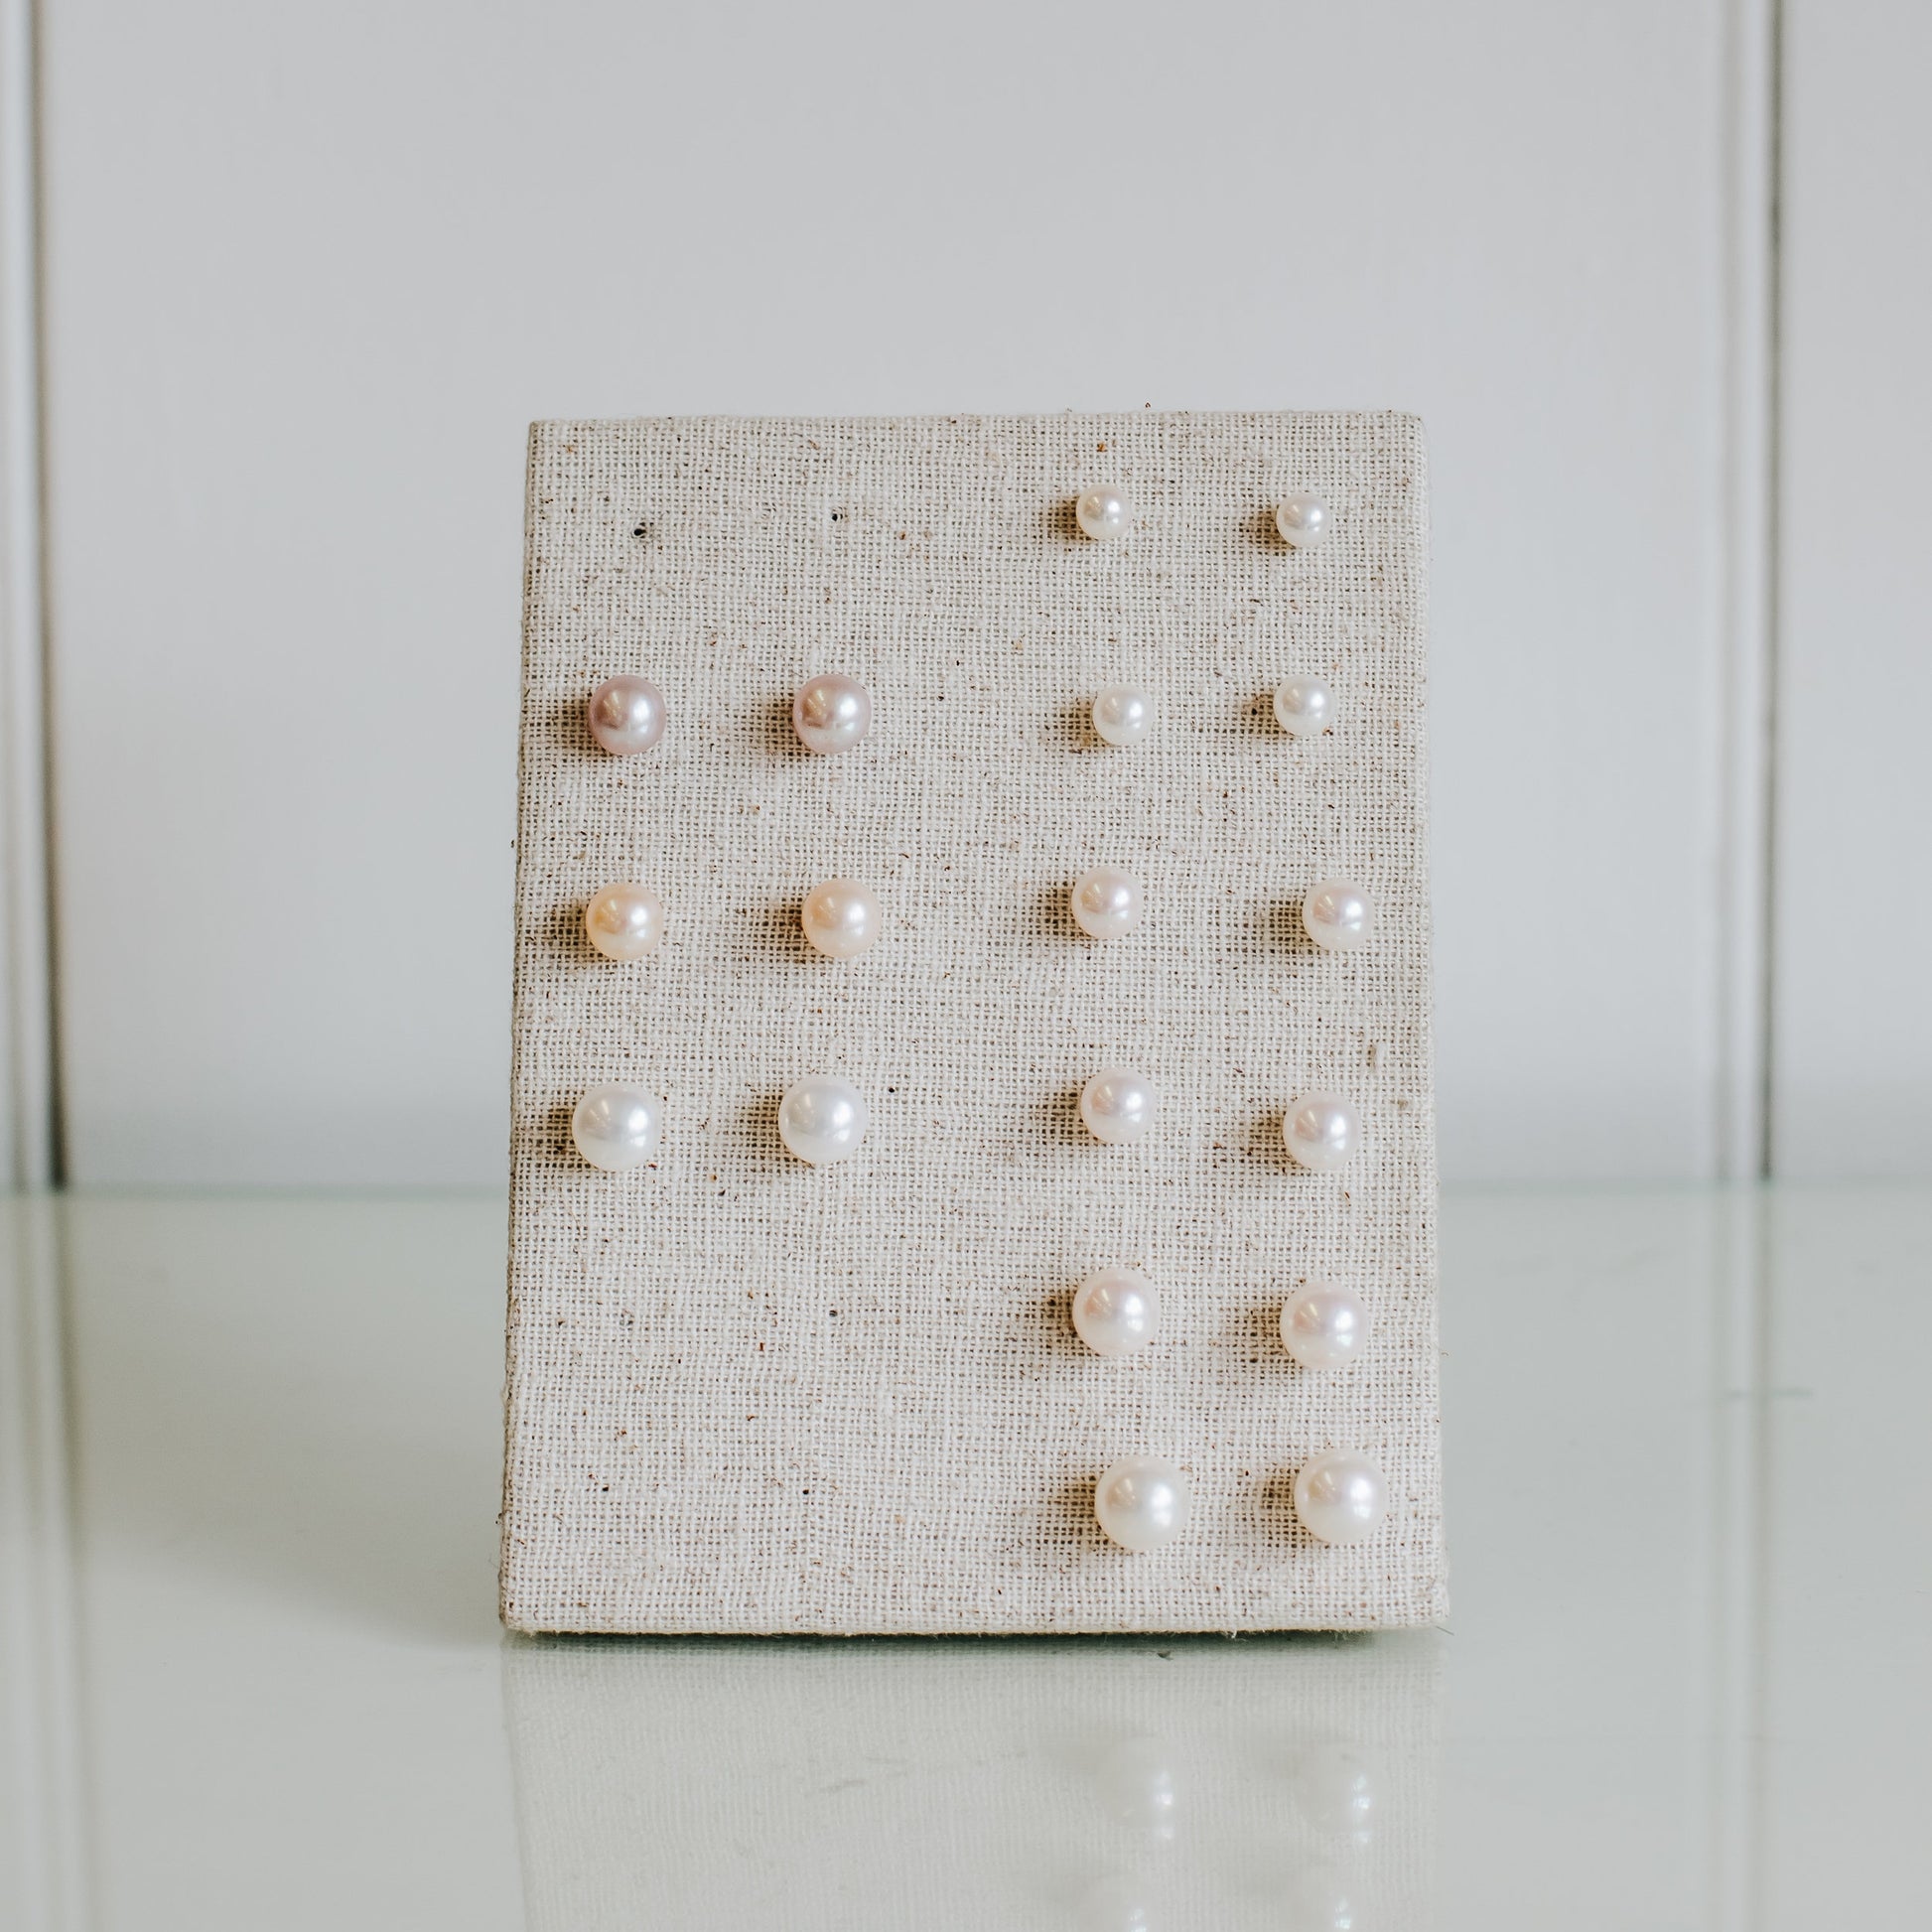 Freshwater Pearl Studs set in 14K Yellow Gold handmade by Jewel in the Sea Nantucket